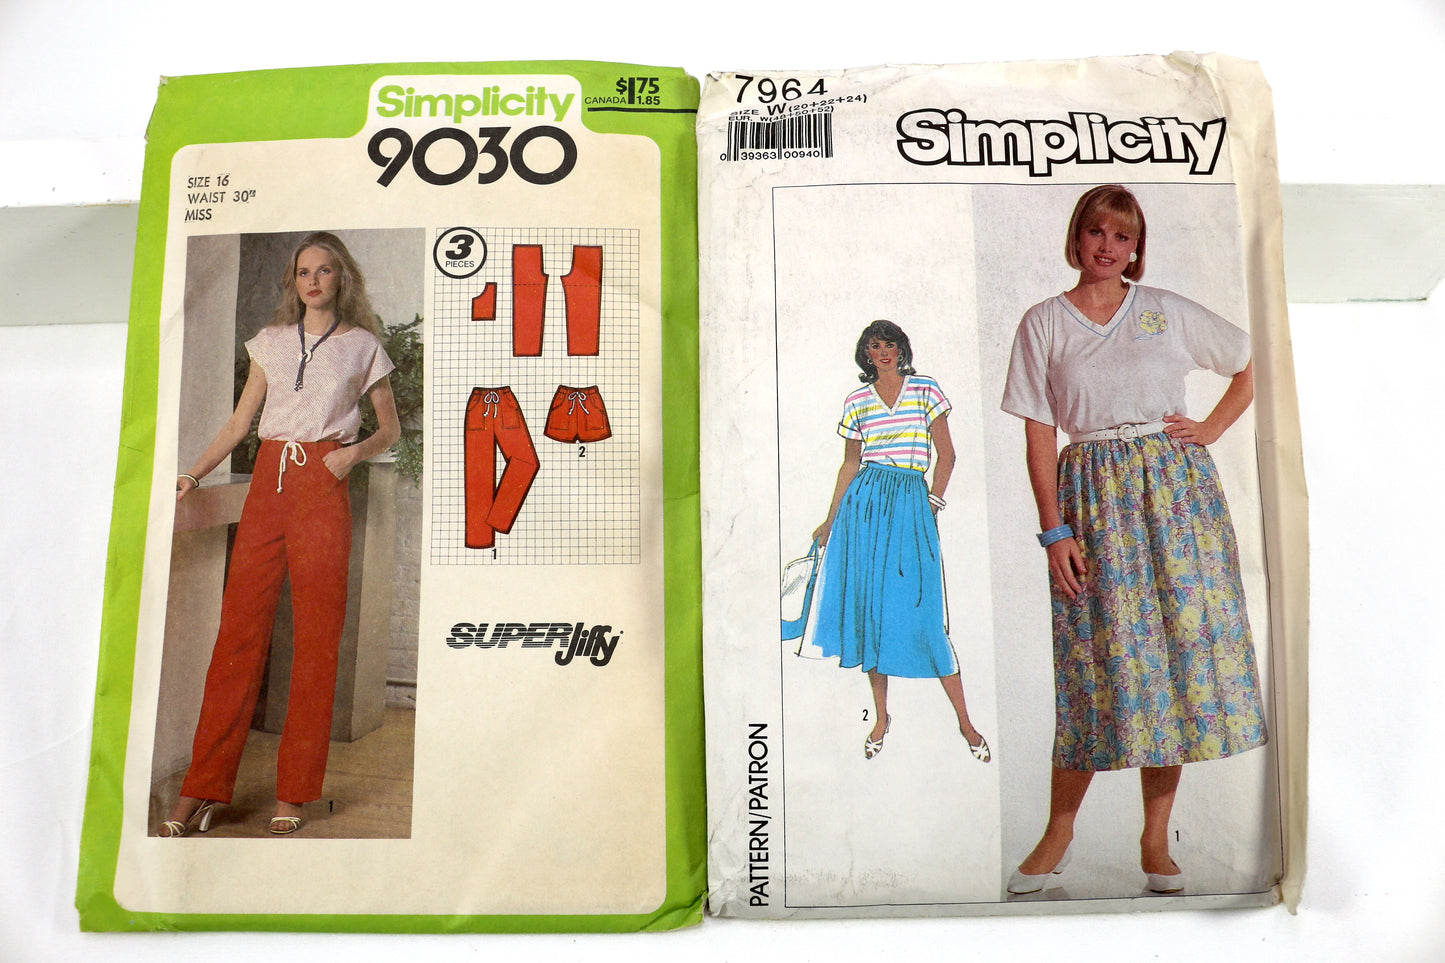 Simplicity 9030 Womens Pants Sewing Pattern or SImplicity 7964 Womens Skirt Sewing Pattern